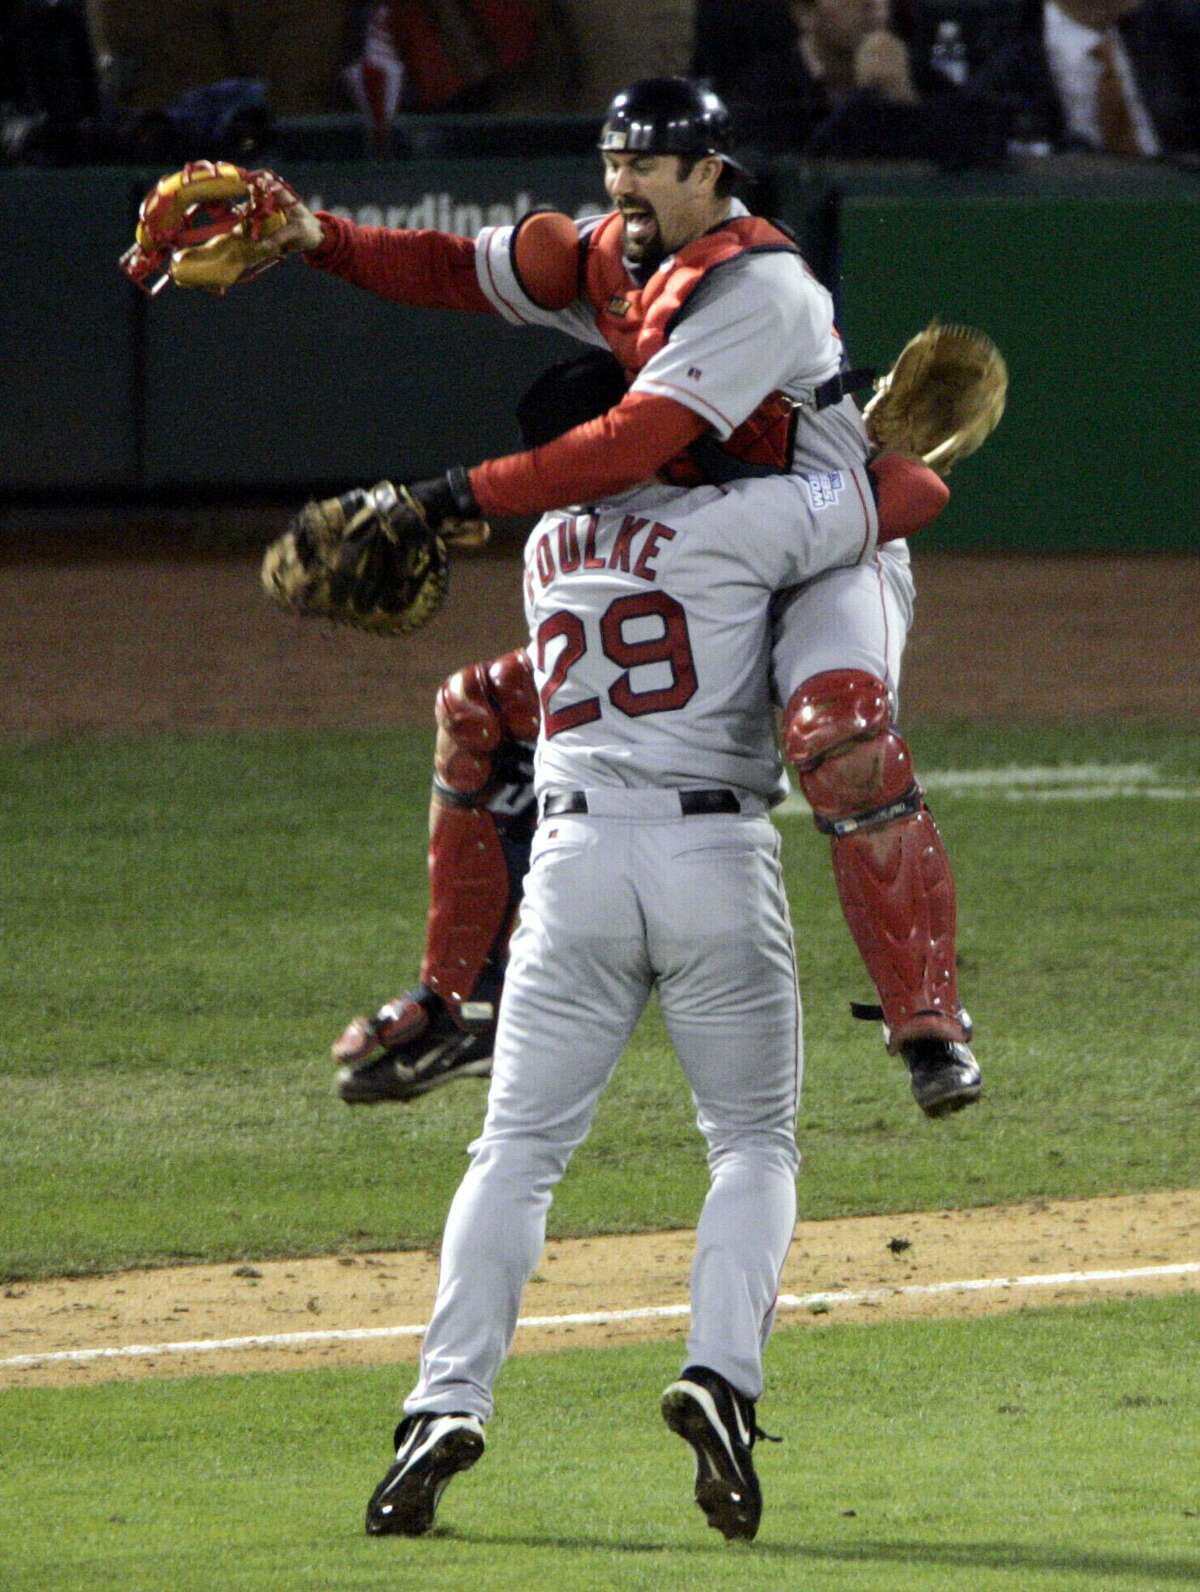 FILE - In this Oct. 27, 2004 file photo, Boston Red Sox catcher Jason Varitek leaps into the arms of pitcher Keith Foulke (29) after the Red Sox beat the St. Louis Cardinals 3-0 to sweep the World Series, in St. Louis. (AP Photo/Sue Ogrocki, File)